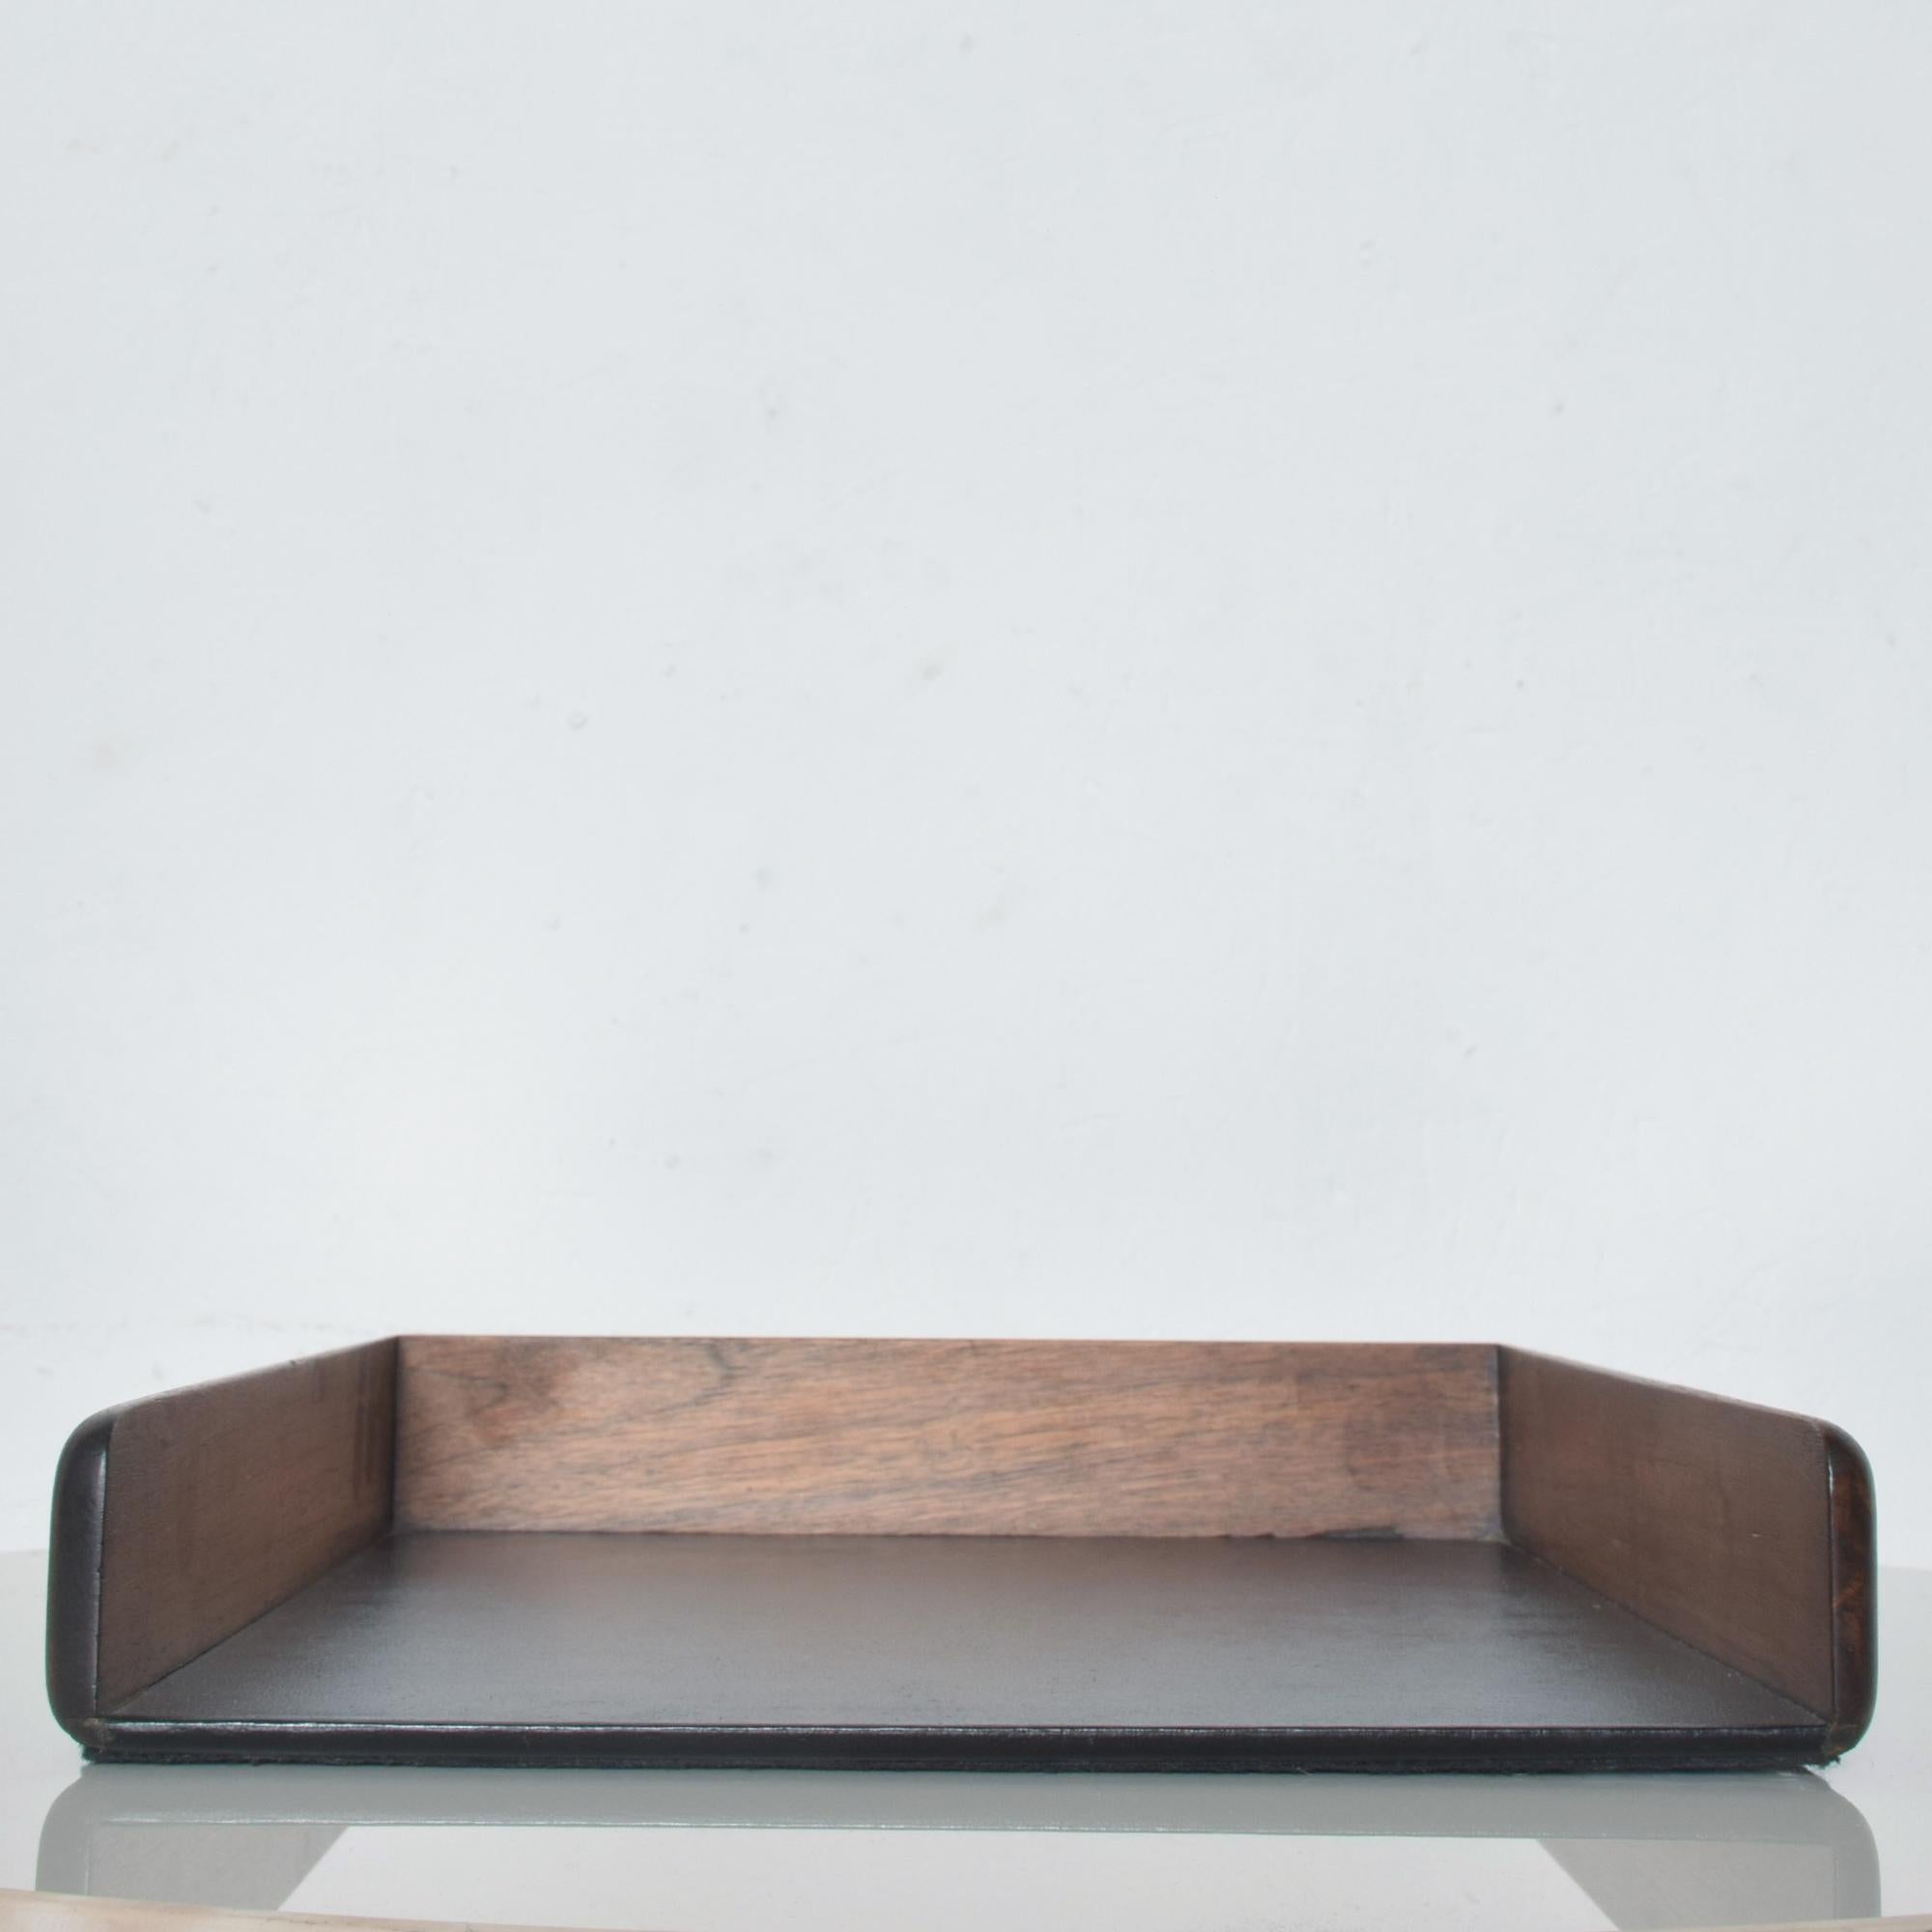 Midcentury sleek and simple handsome modern desk office tray in warm walnut wood

Clean design inbox outbox mail paper holder desk tray, circa 1970s. Style of Peter Pepper Products.

Measures: 13 1/2